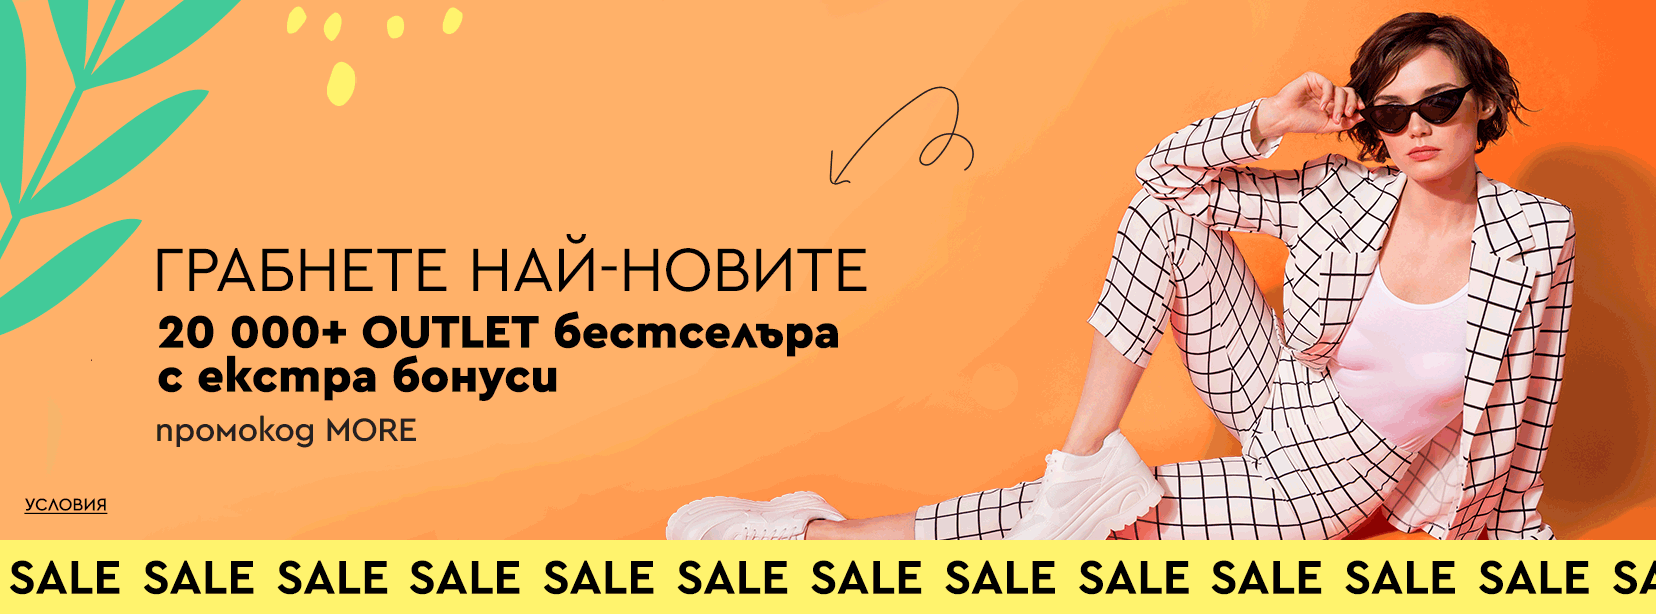 20 000+ OUTLET бестселъра с екстра бонуси